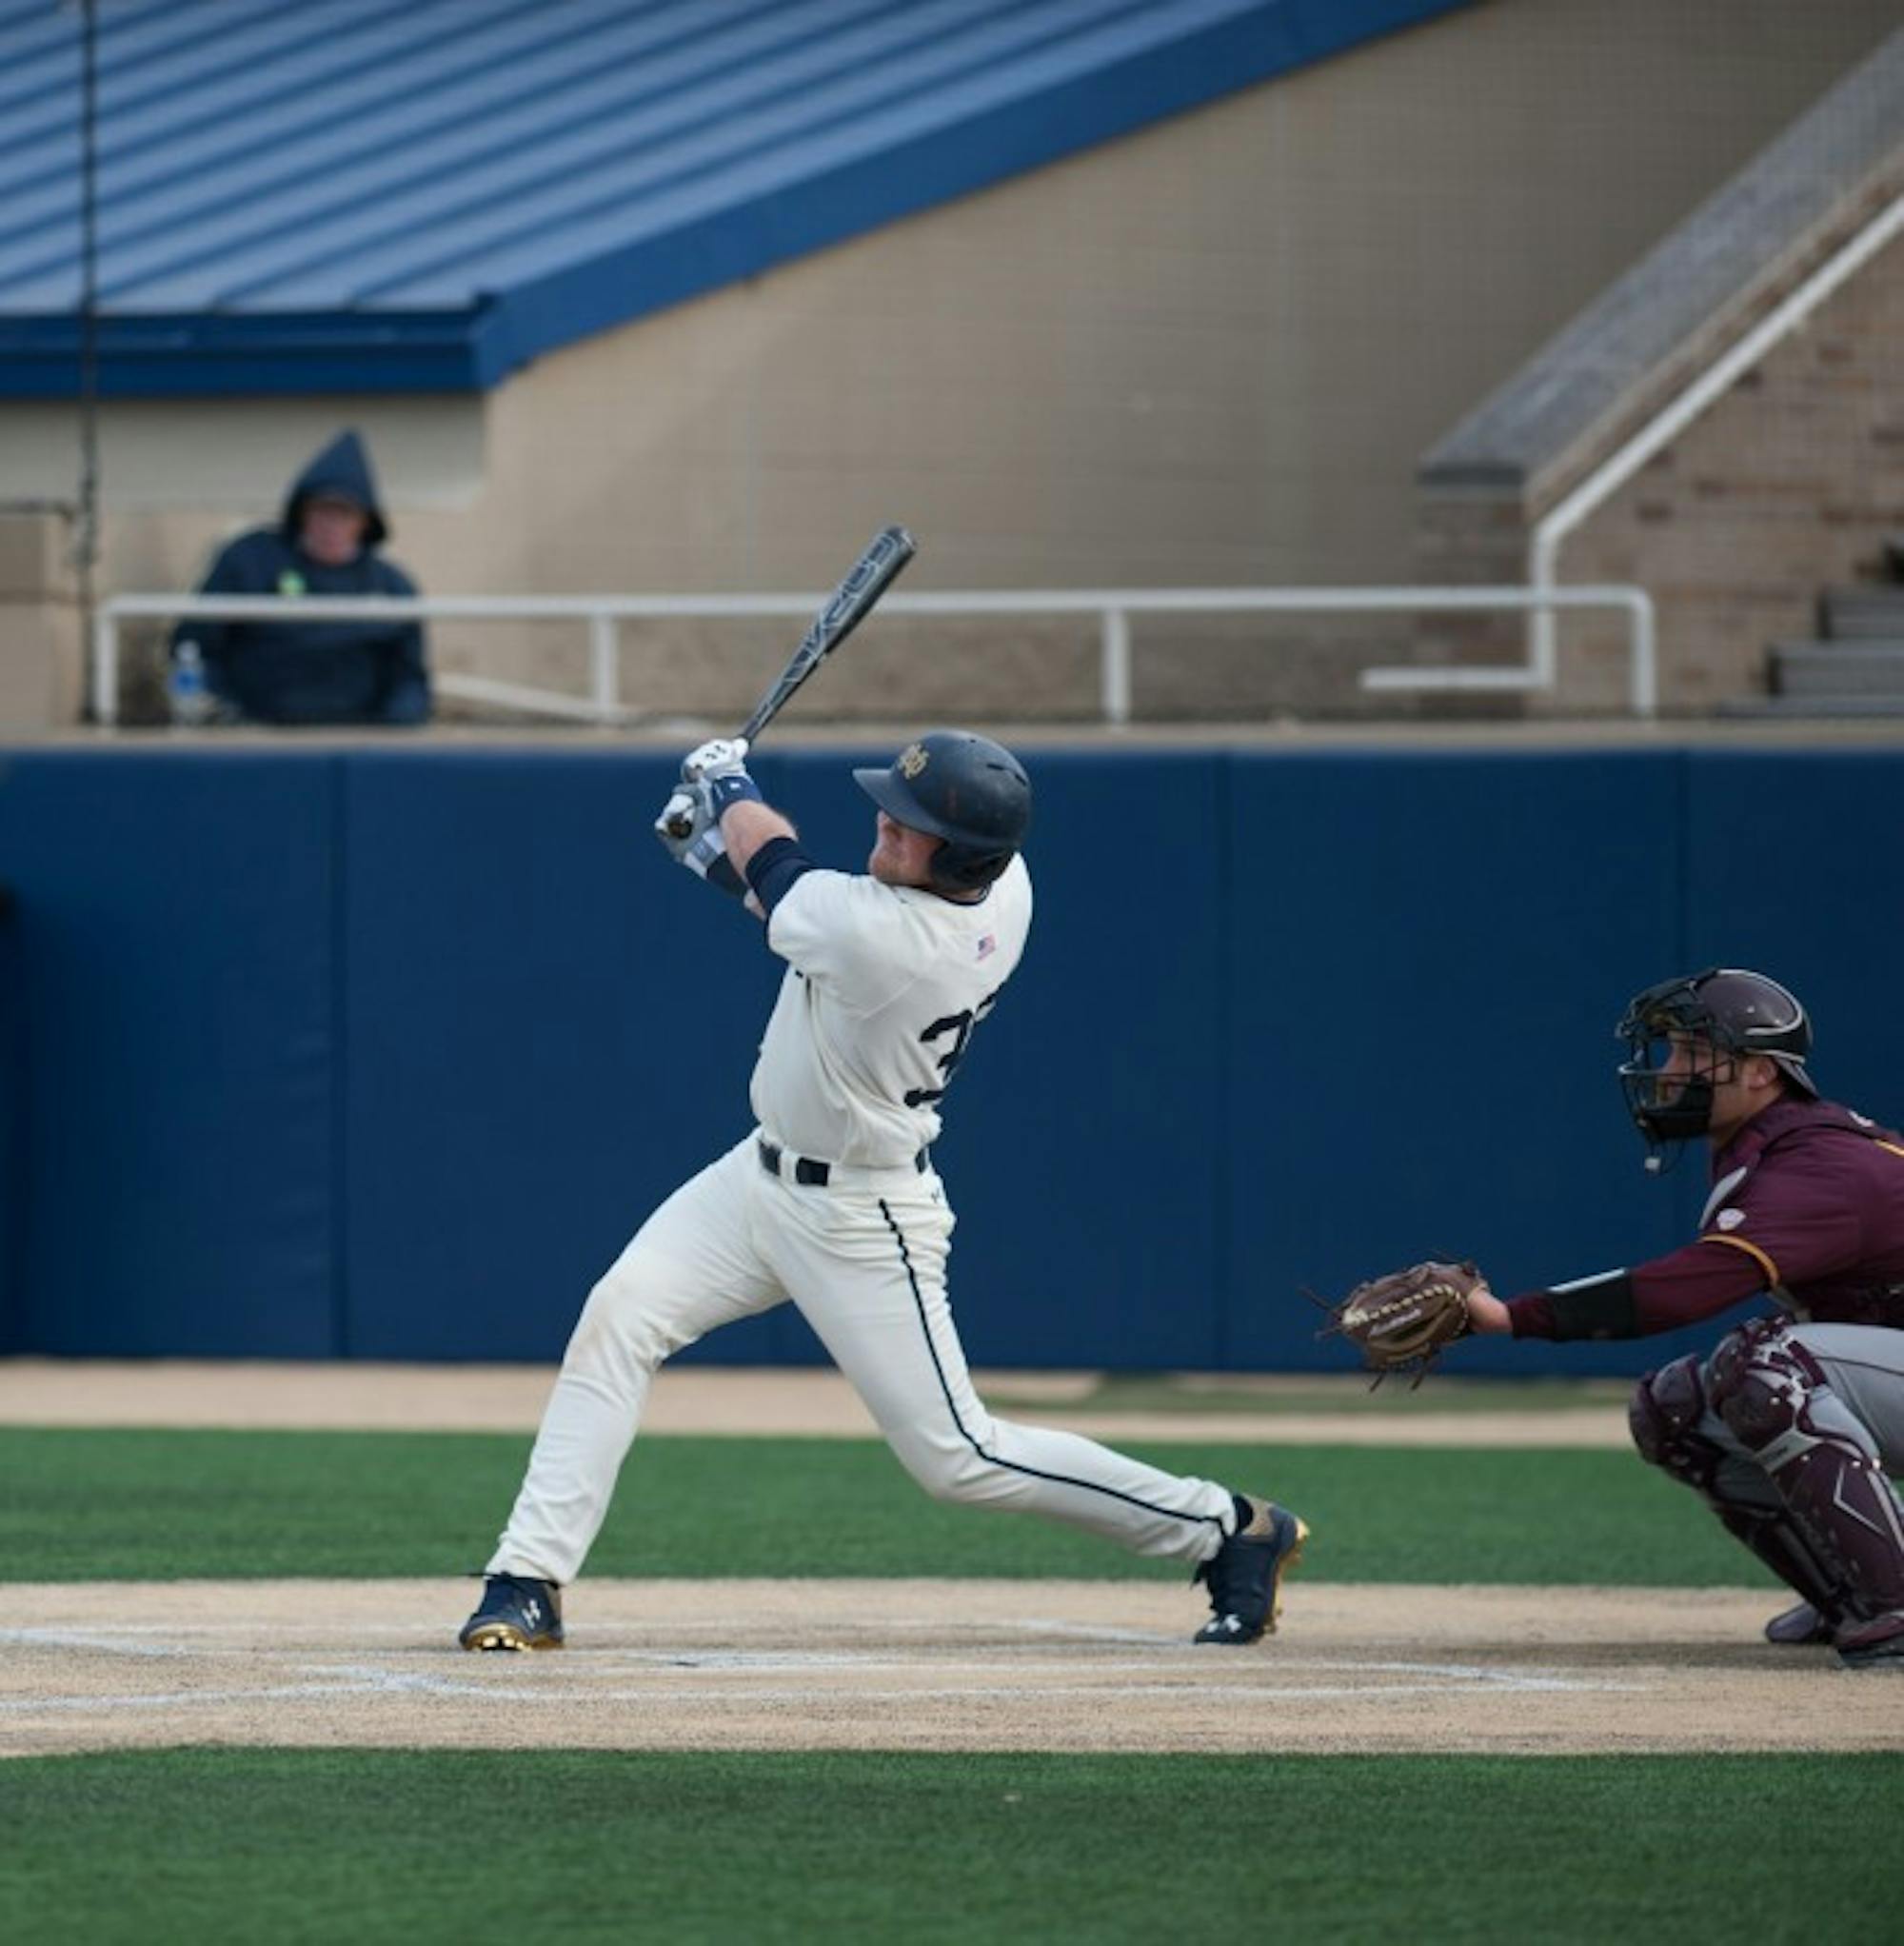 Sophomore catcher Ryan Lidge follows through on a swing during Notre Dame’s 8-3 win against Central Michigan on March 18.